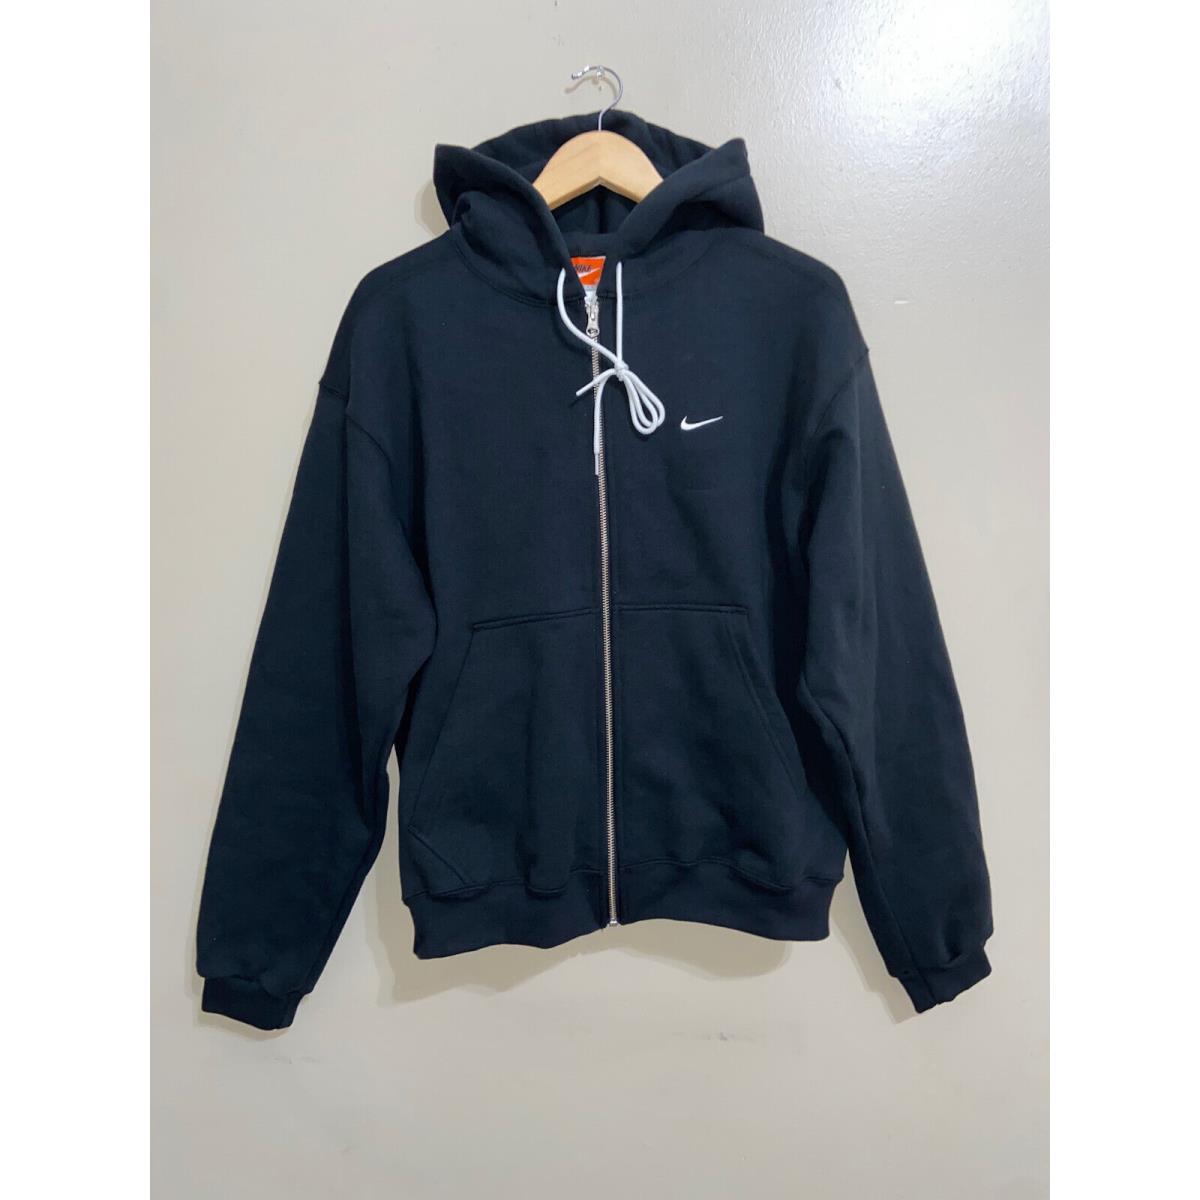 Men Nike Lab Full-zip Solo Swoosh Vintage Hoodie Made In Usa Size M DH5042-010